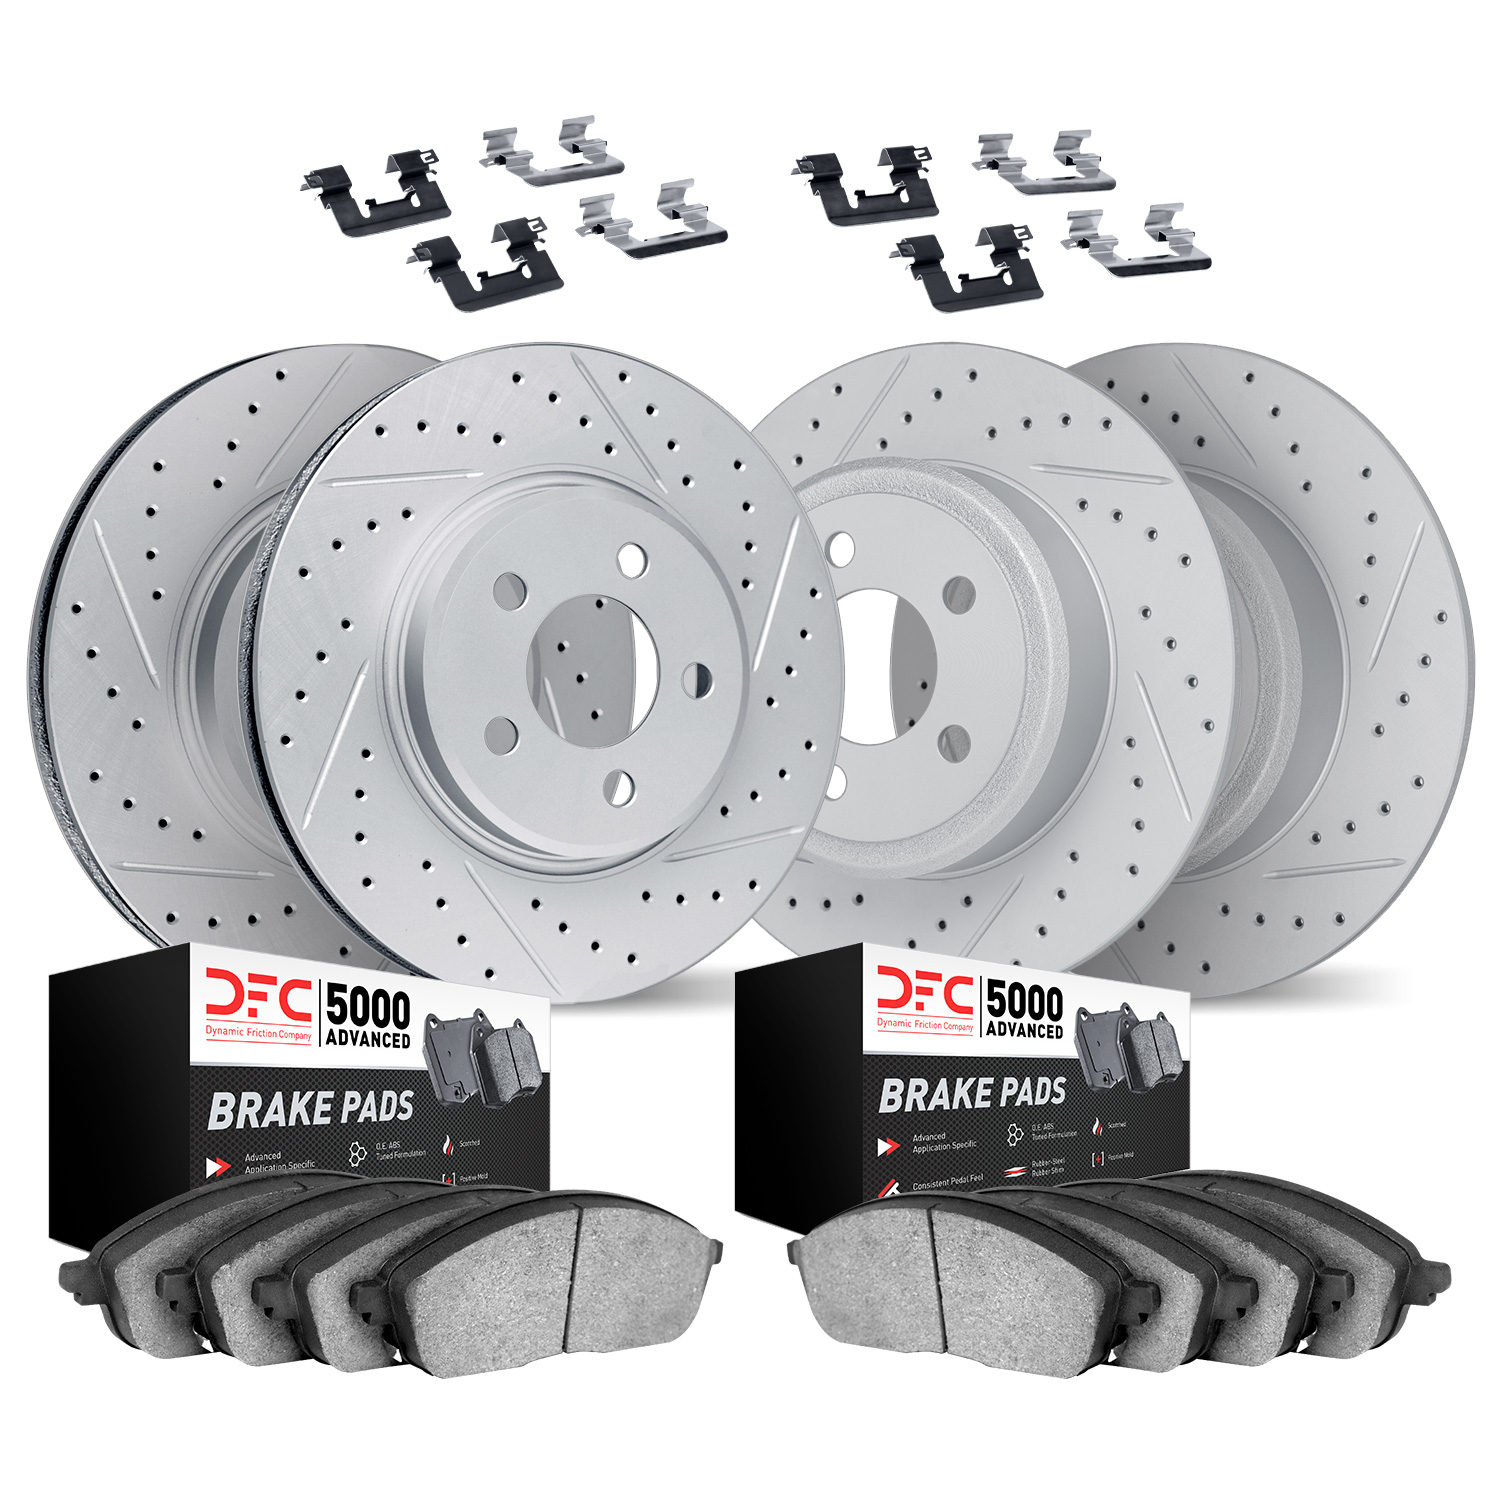 2514-47296 Geoperformance Drilled/Slotted Rotors w/5000 Advanced Brake Pads Kit & Hardware, 2009-2010 GM, Position: Front and Re